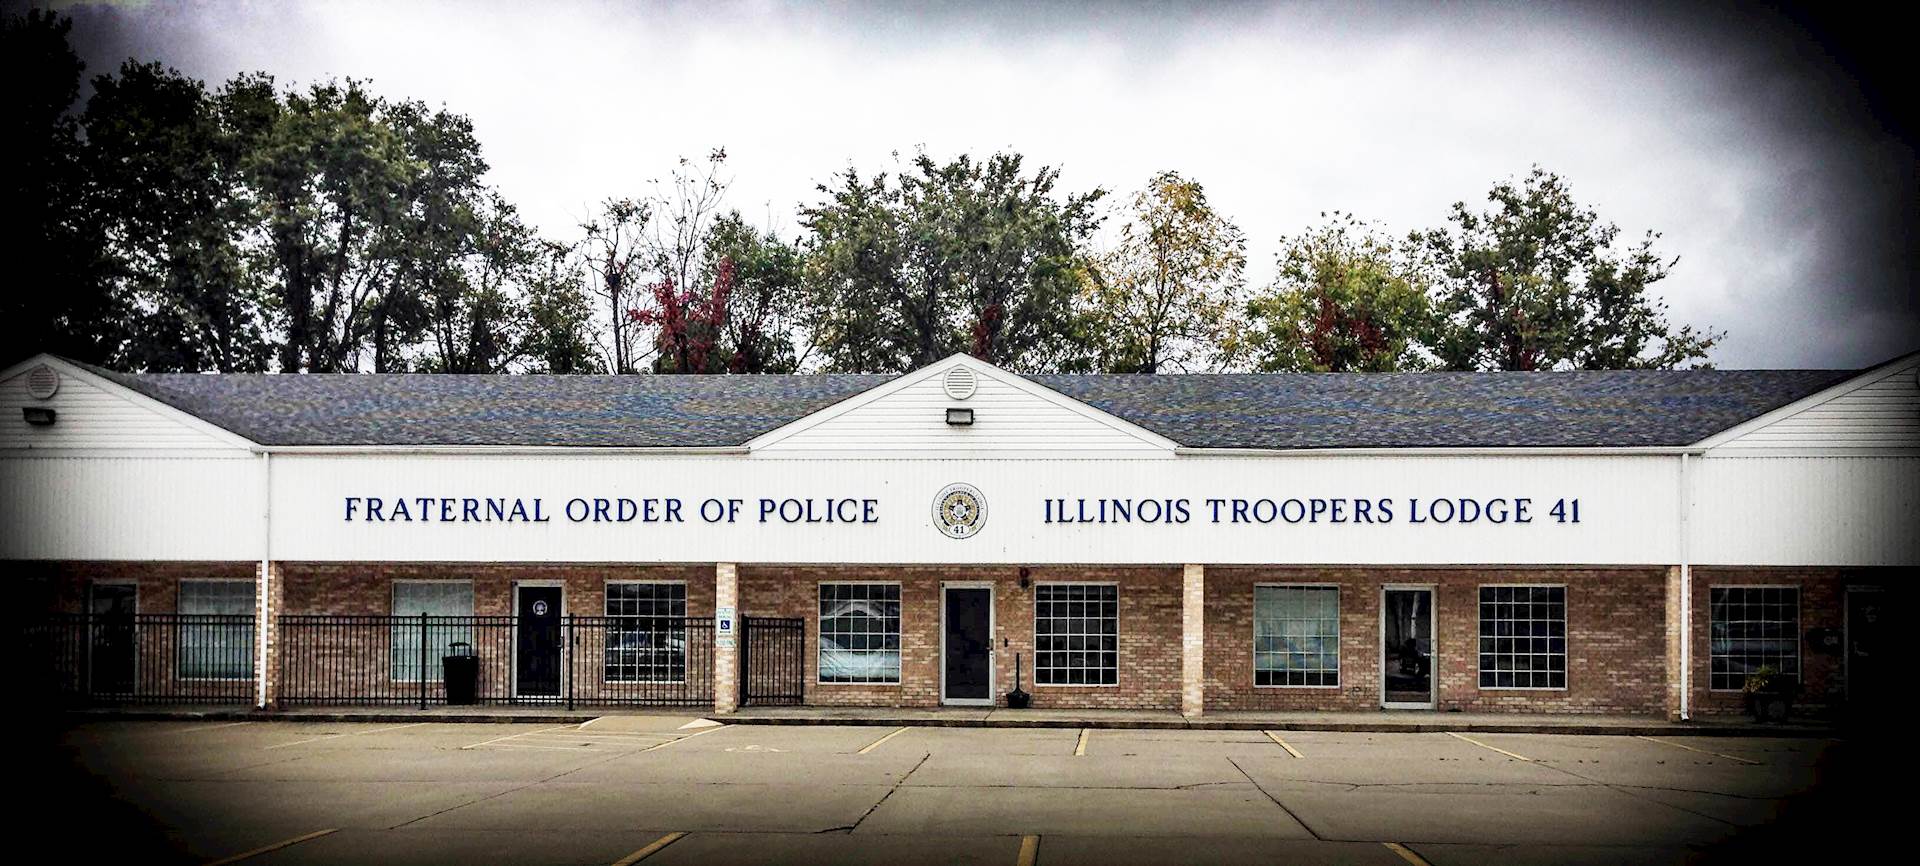 The Illinois Troopers Lodge #41 building